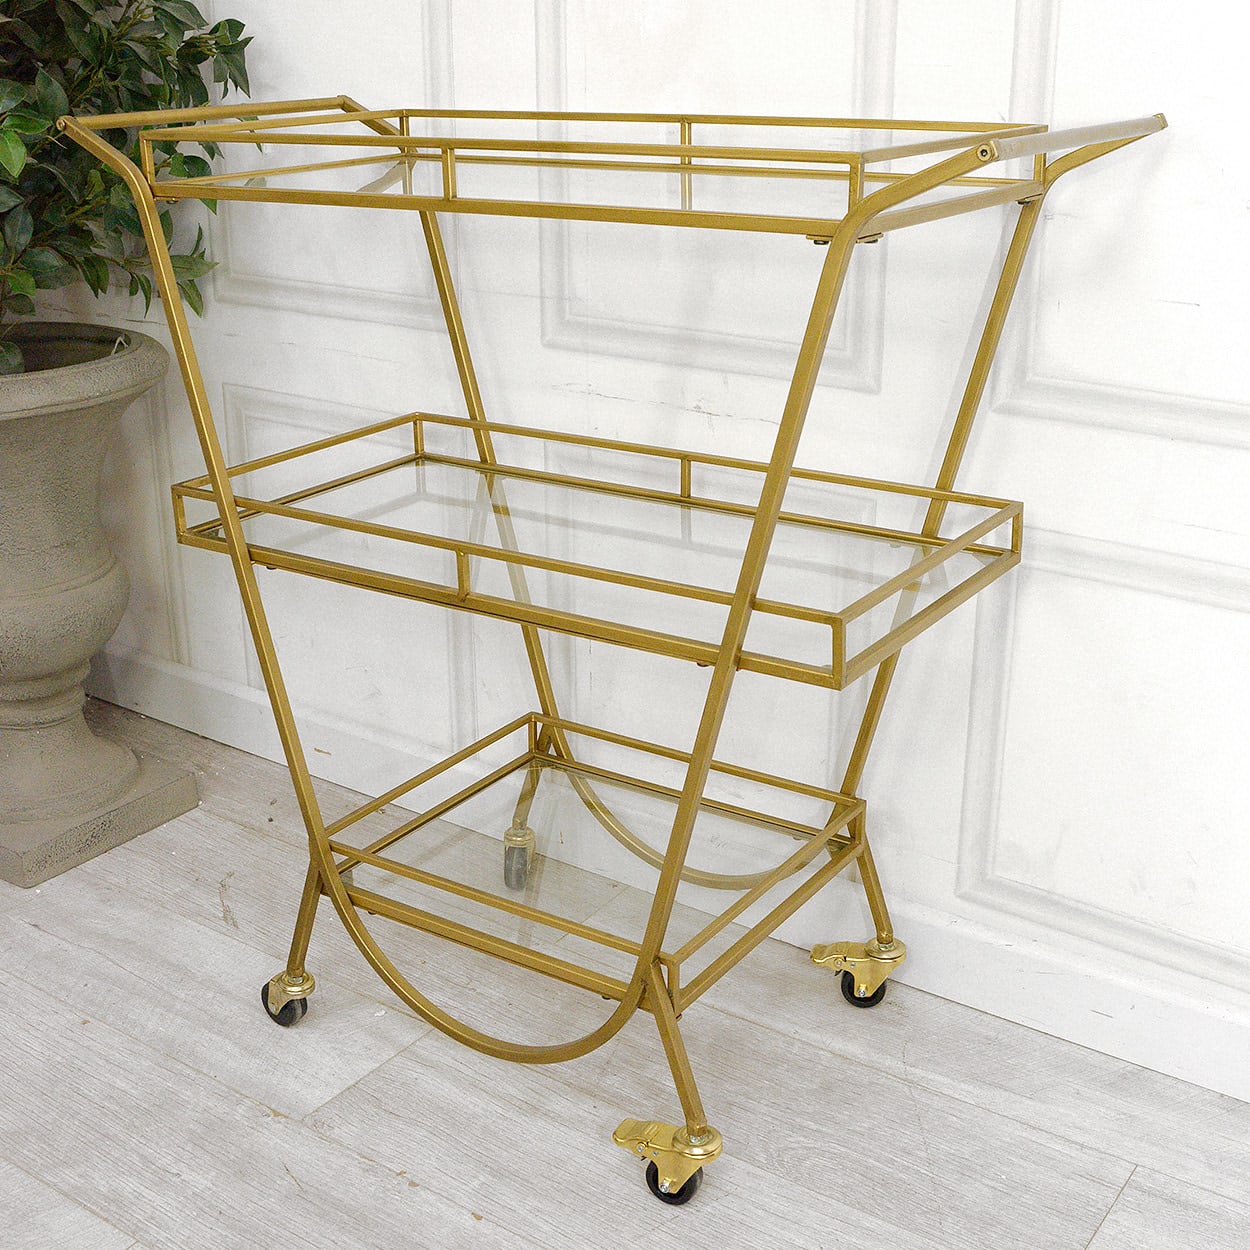 Gold and Glass Tiered Drinks Trolley